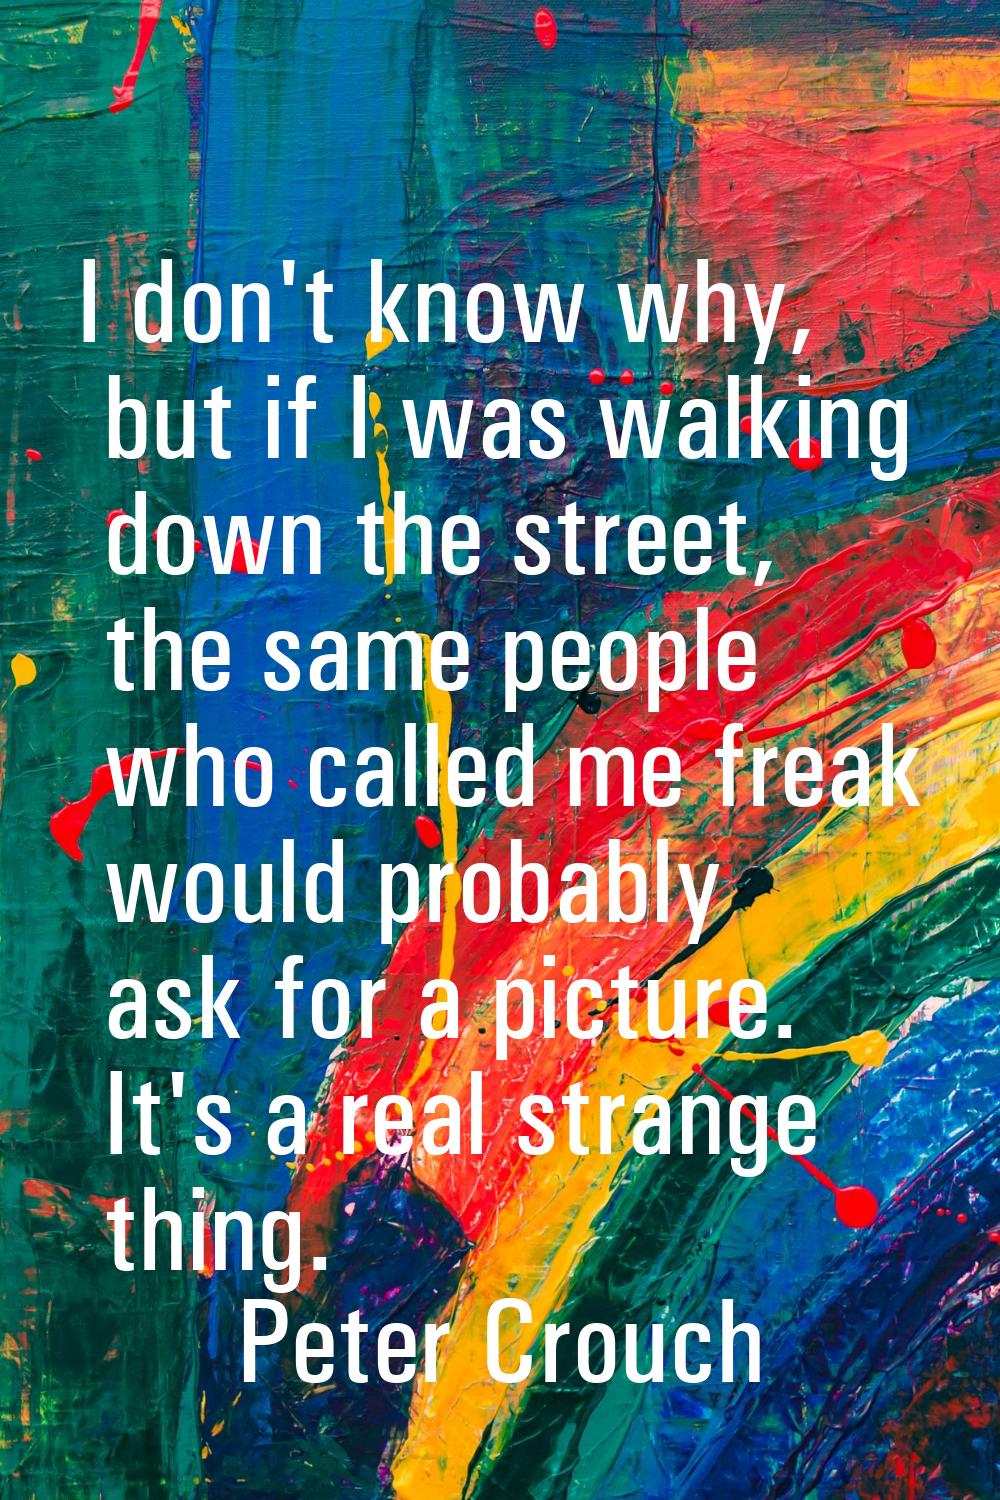 I don't know why, but if I was walking down the street, the same people who called me freak would p